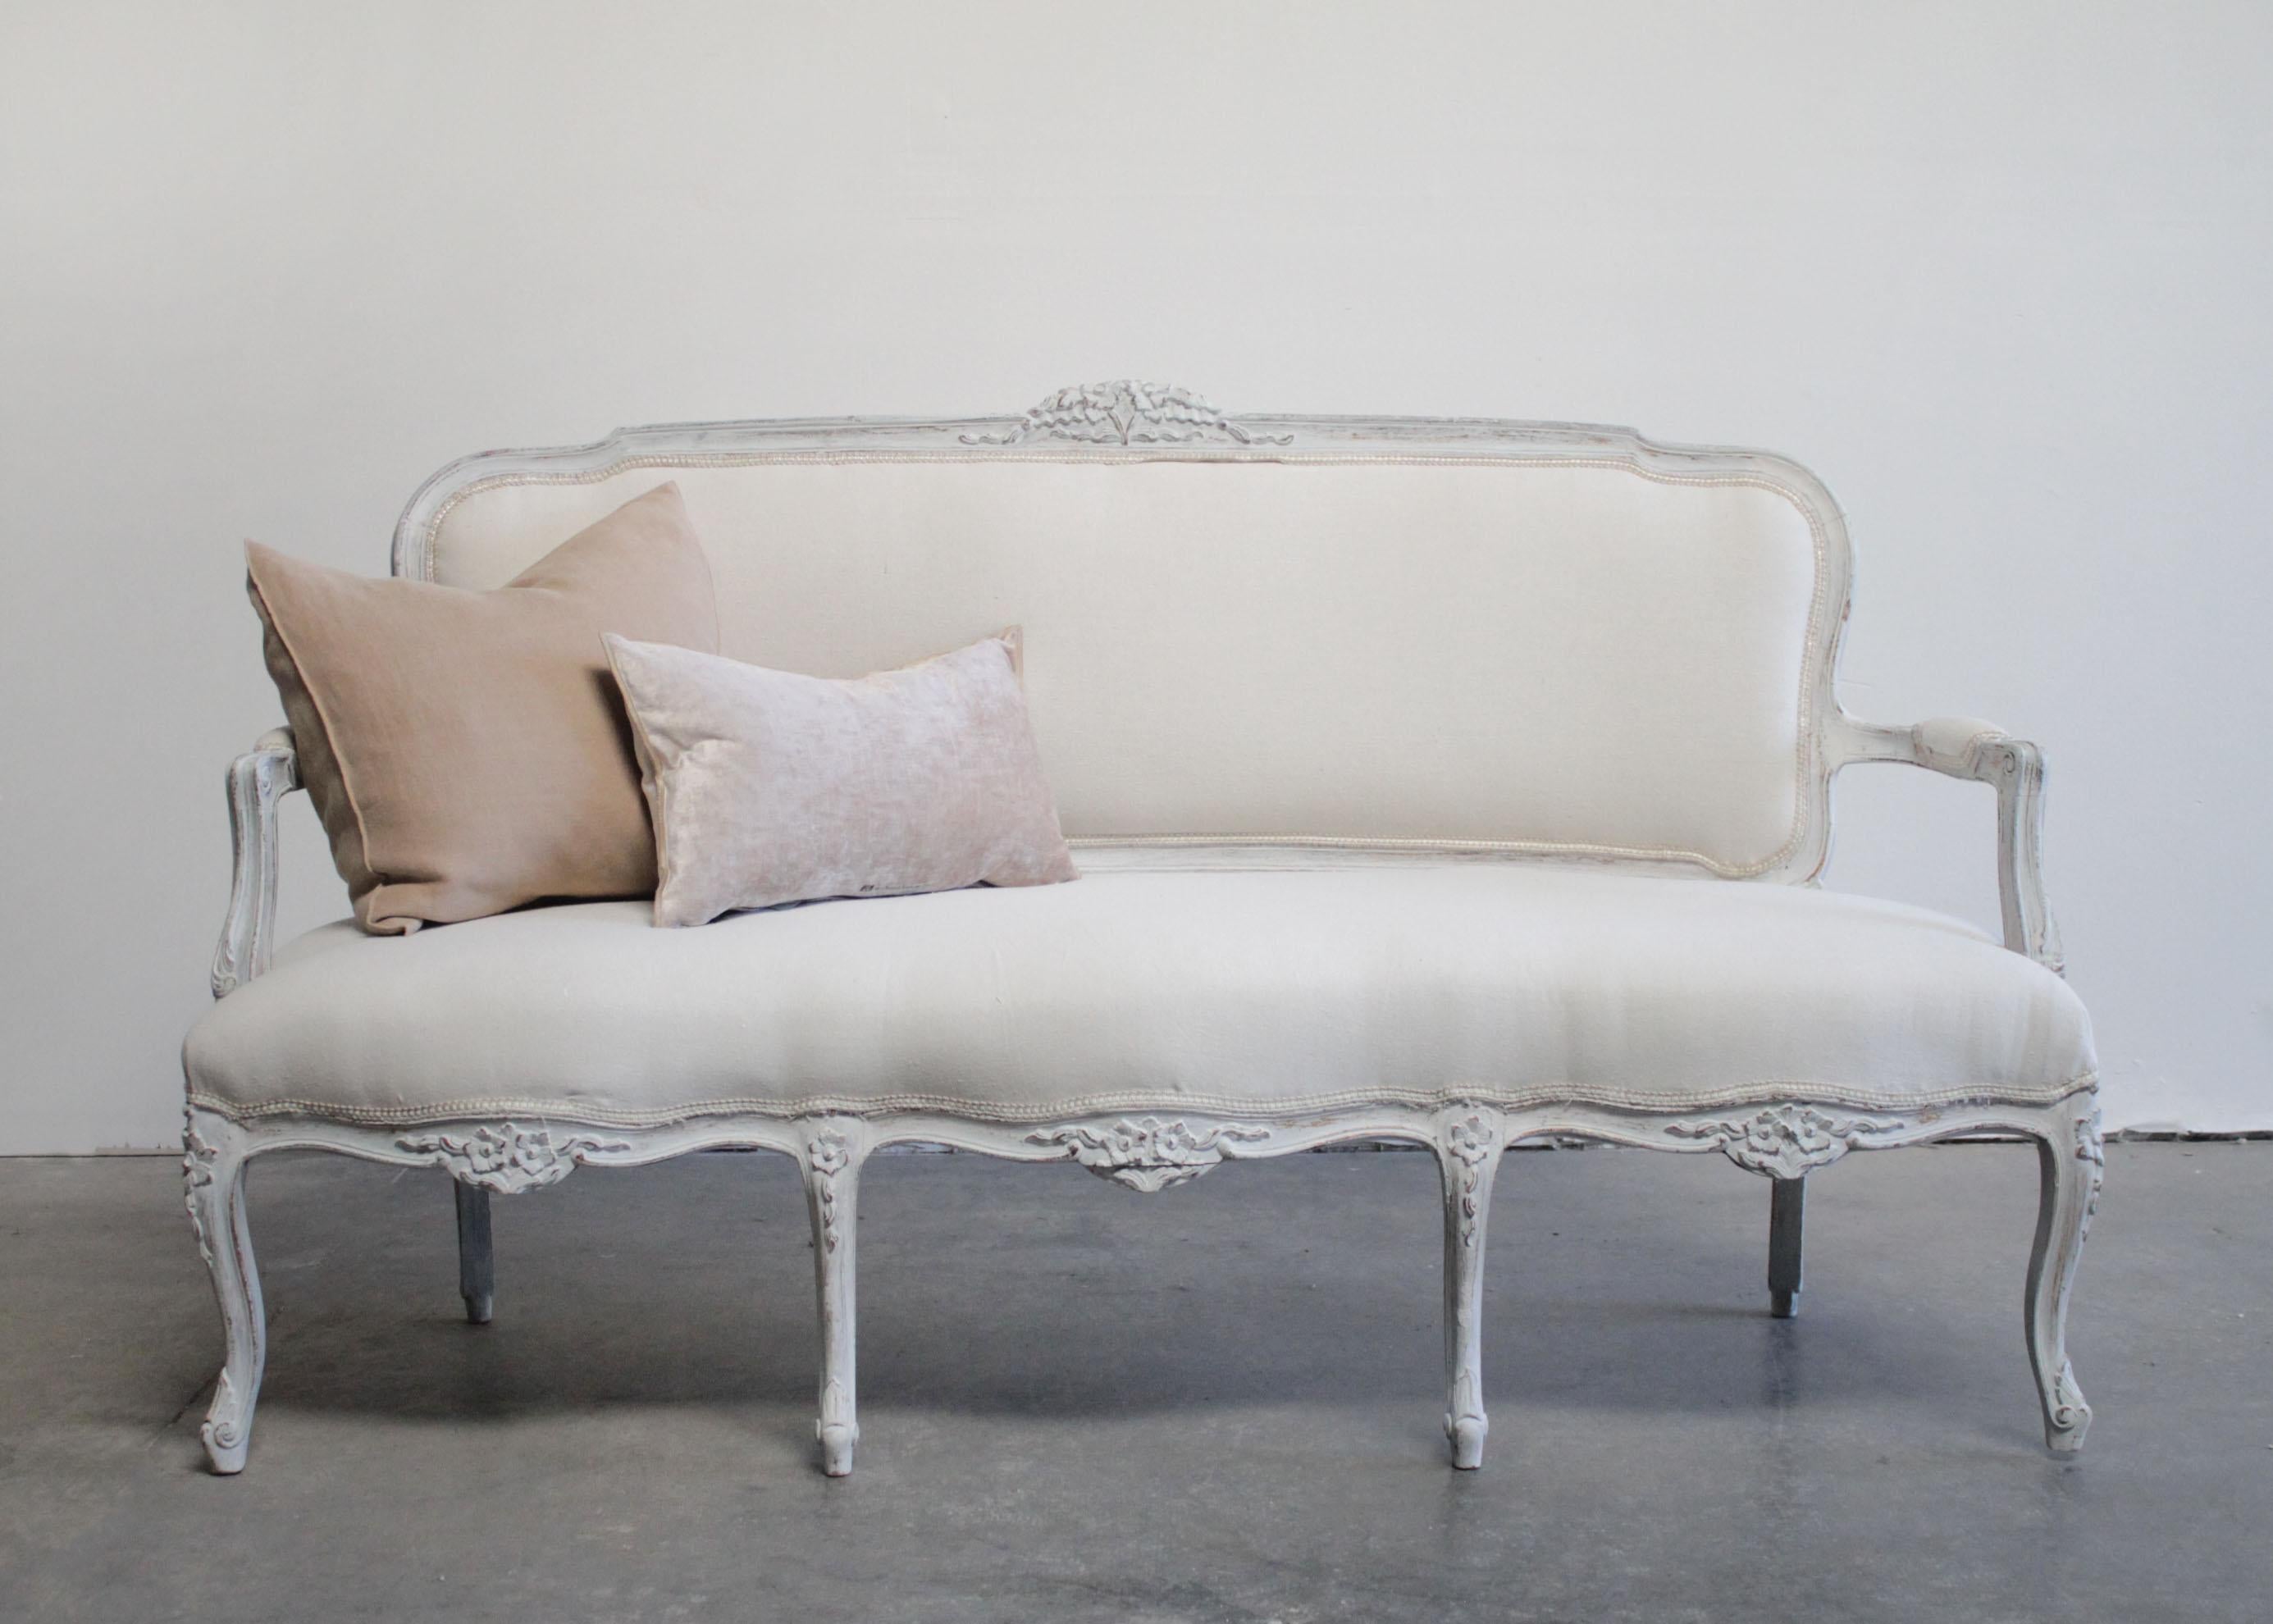 Vintage painted and upholstered Louis XV style open arm sofa settee
Painted in a French gray with subtle distressed edges, where gilt and wood show through.
Classic Louis XV legs, with a medallion carving, and large rose and flower garland